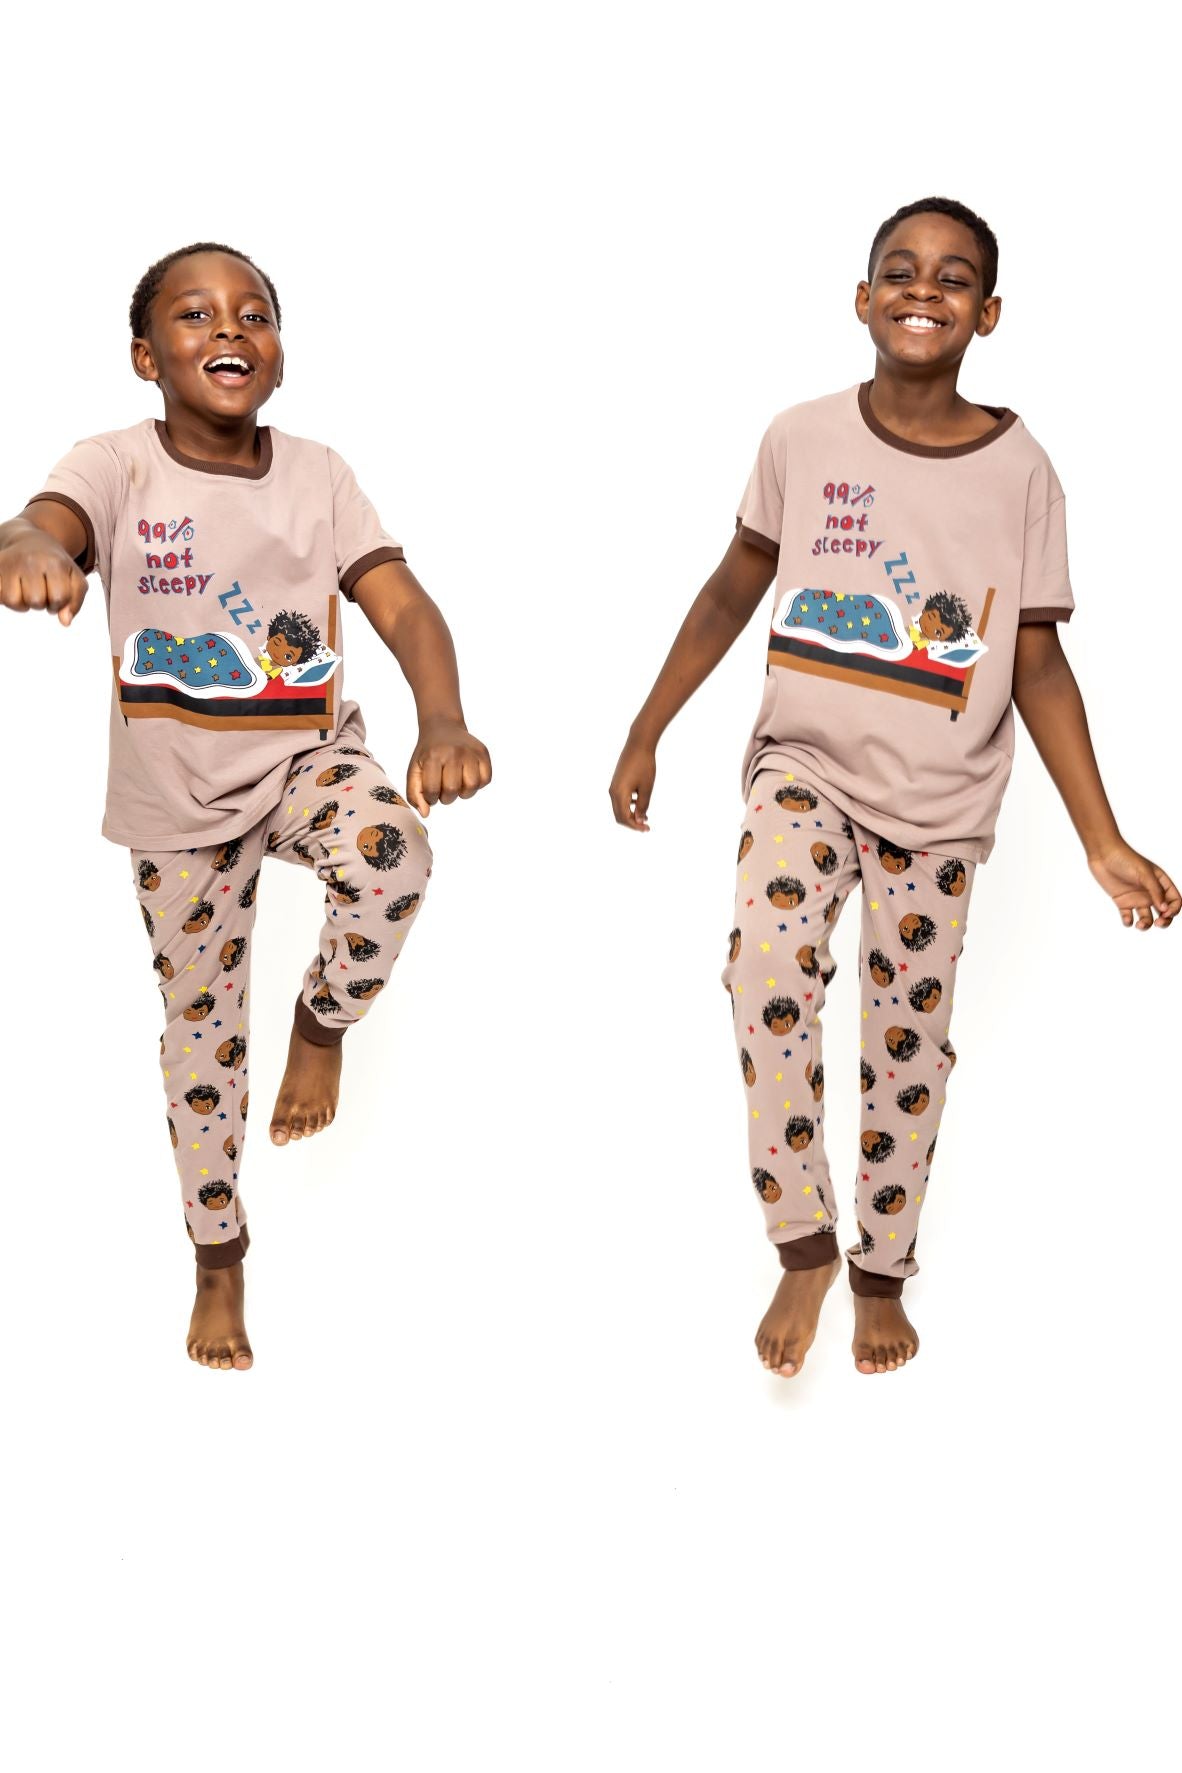 99% NOT READY FOR BED BOY PAJAMA 2 PC SET SIZE TODDLER 2T - 14 CHOCOLATE